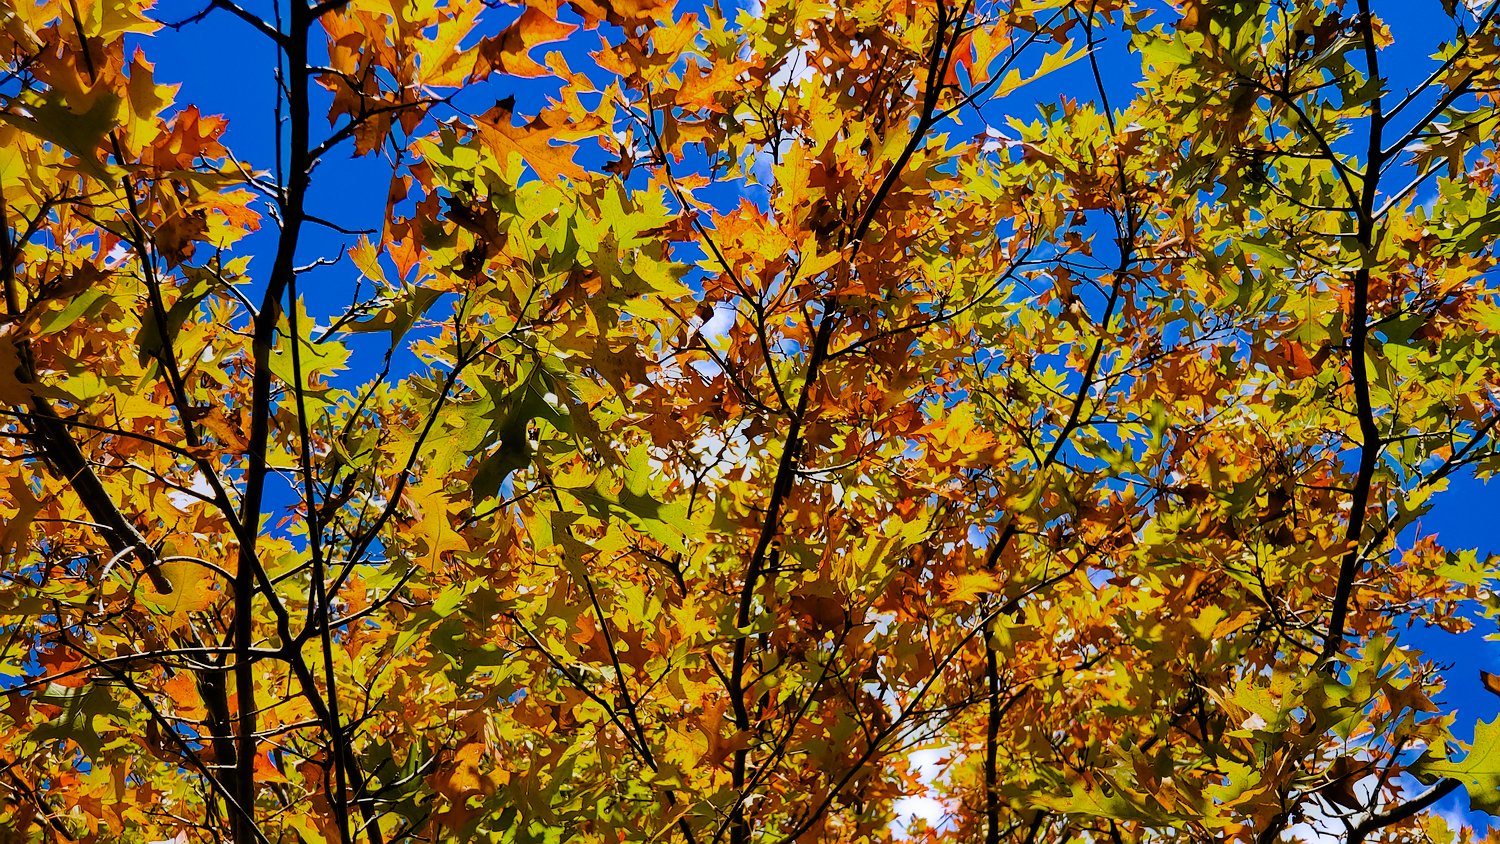 Vibrant fall leaves against the blue sky at Rush Creek Conservation Area.